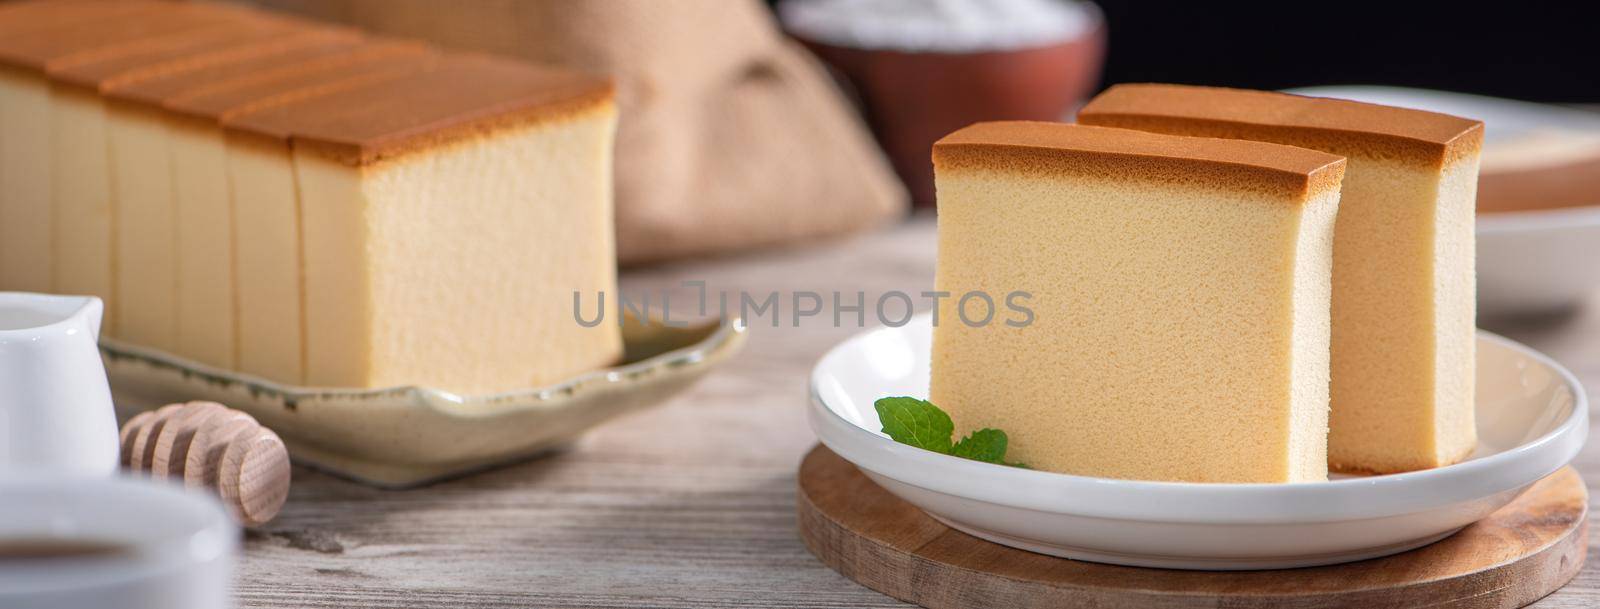 Castella (kasutera) - Delicious Japanese sliced sponge cake food on white plate over rustic wooden table, close up, healthy eating, copy space design.